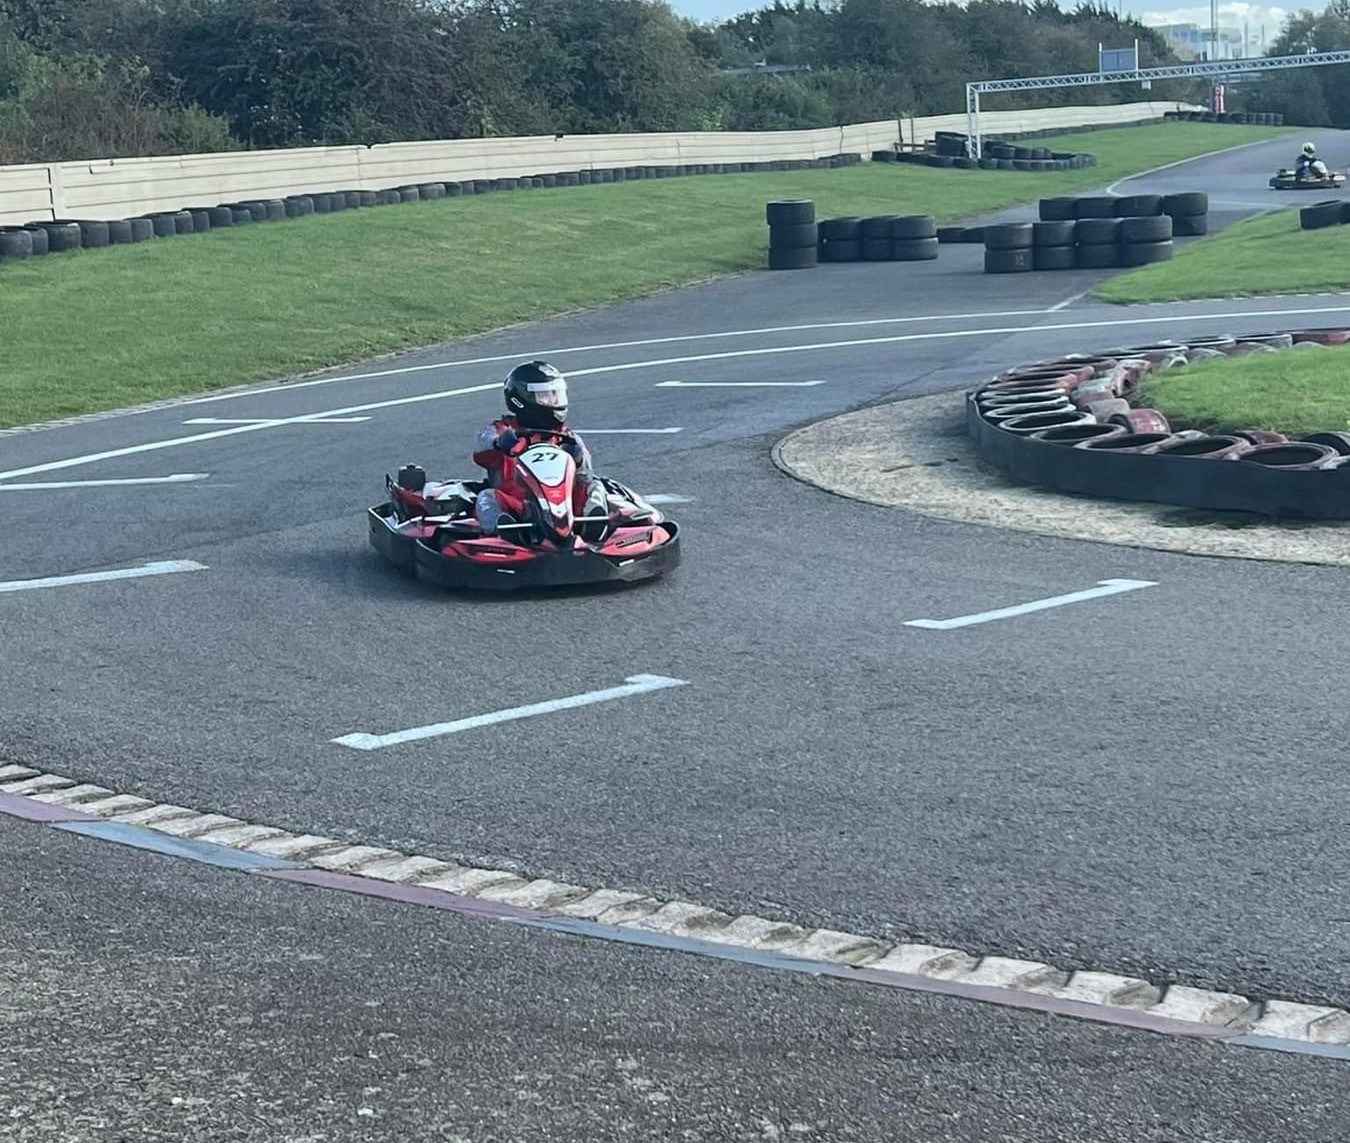 Bellway NHC - Victory at Charity Carting Event